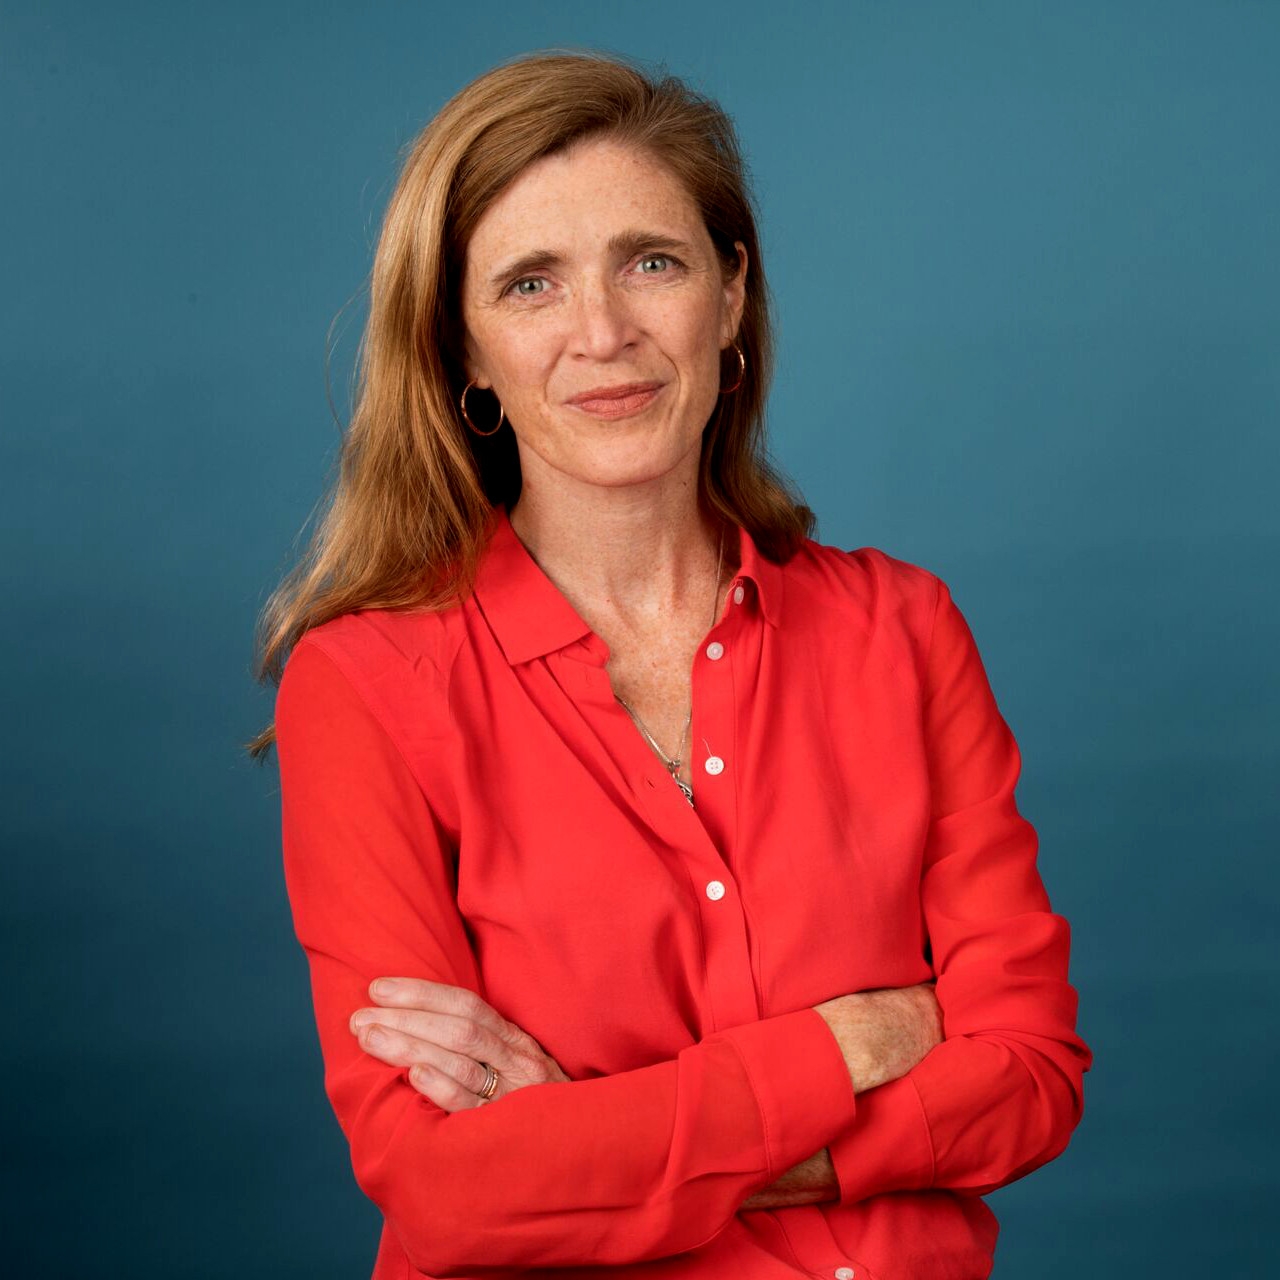 Former U.S. Ambassador Samantha Power to Receive Refugee Advocate Award at Save the Children Boston Leadership Council’s 2nd Annual Gala 